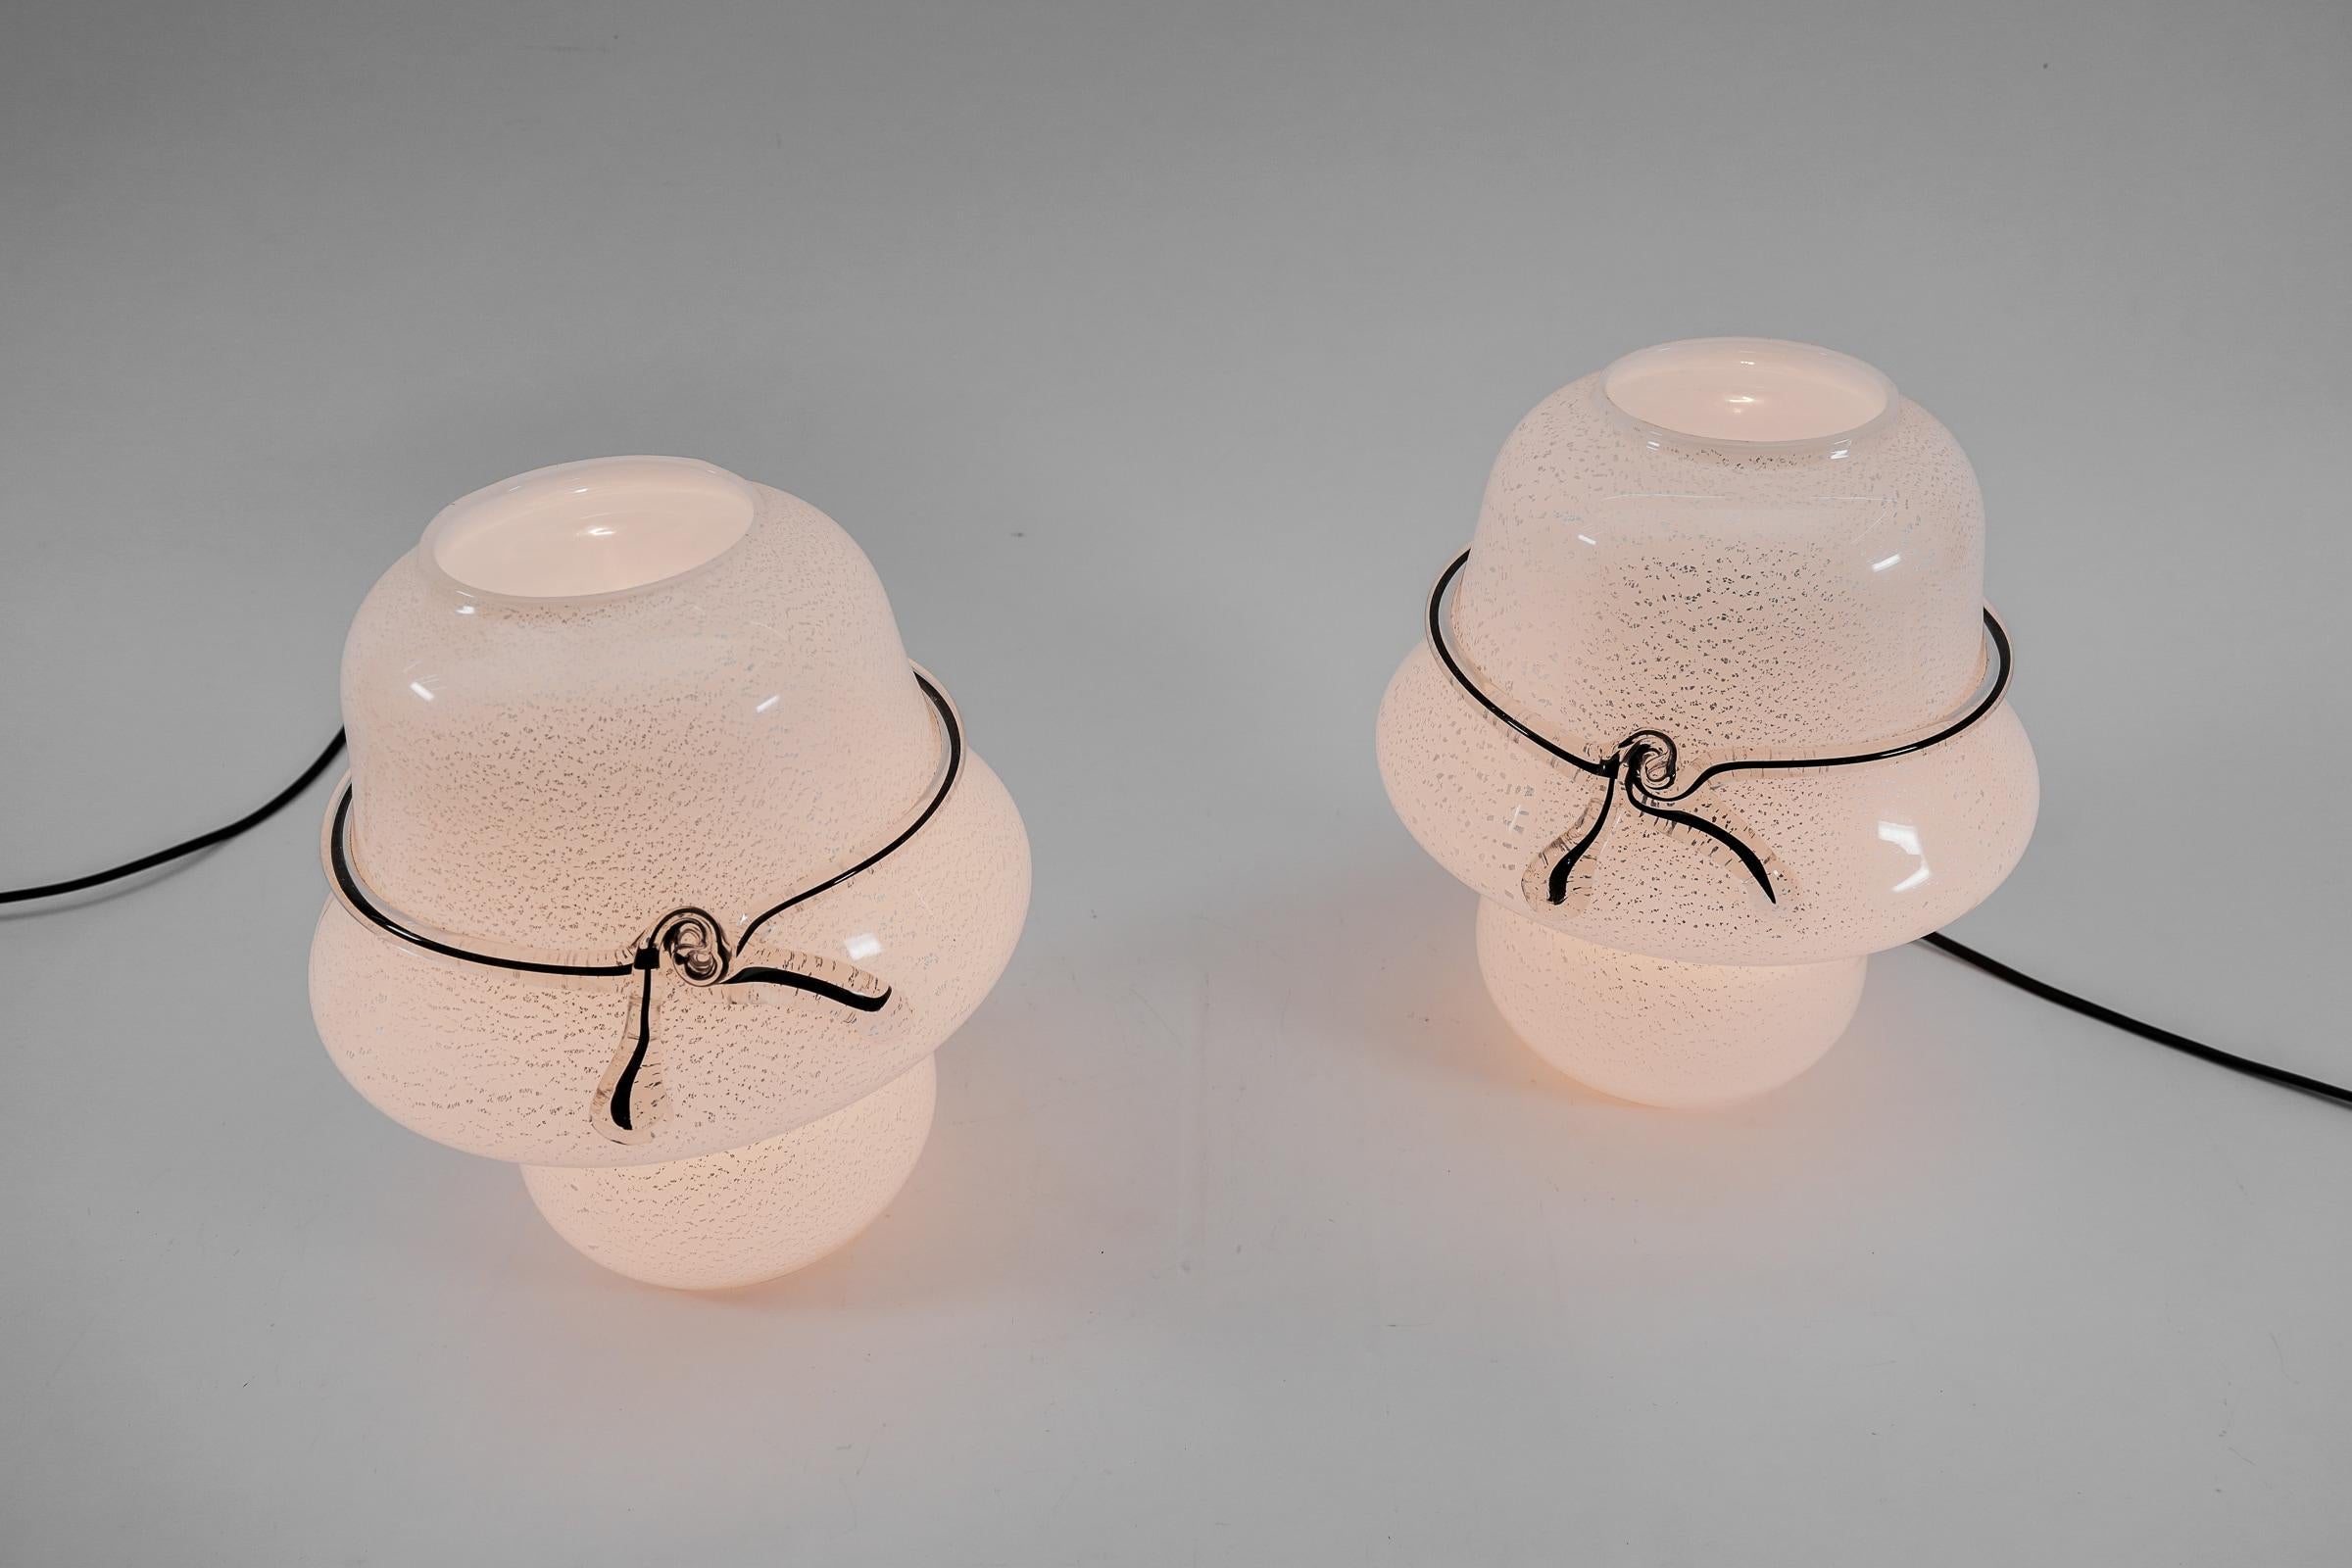 Pair of Murano Mushroom Table Lamps with Enclosed Silver Platelets, 1960s For Sale 3